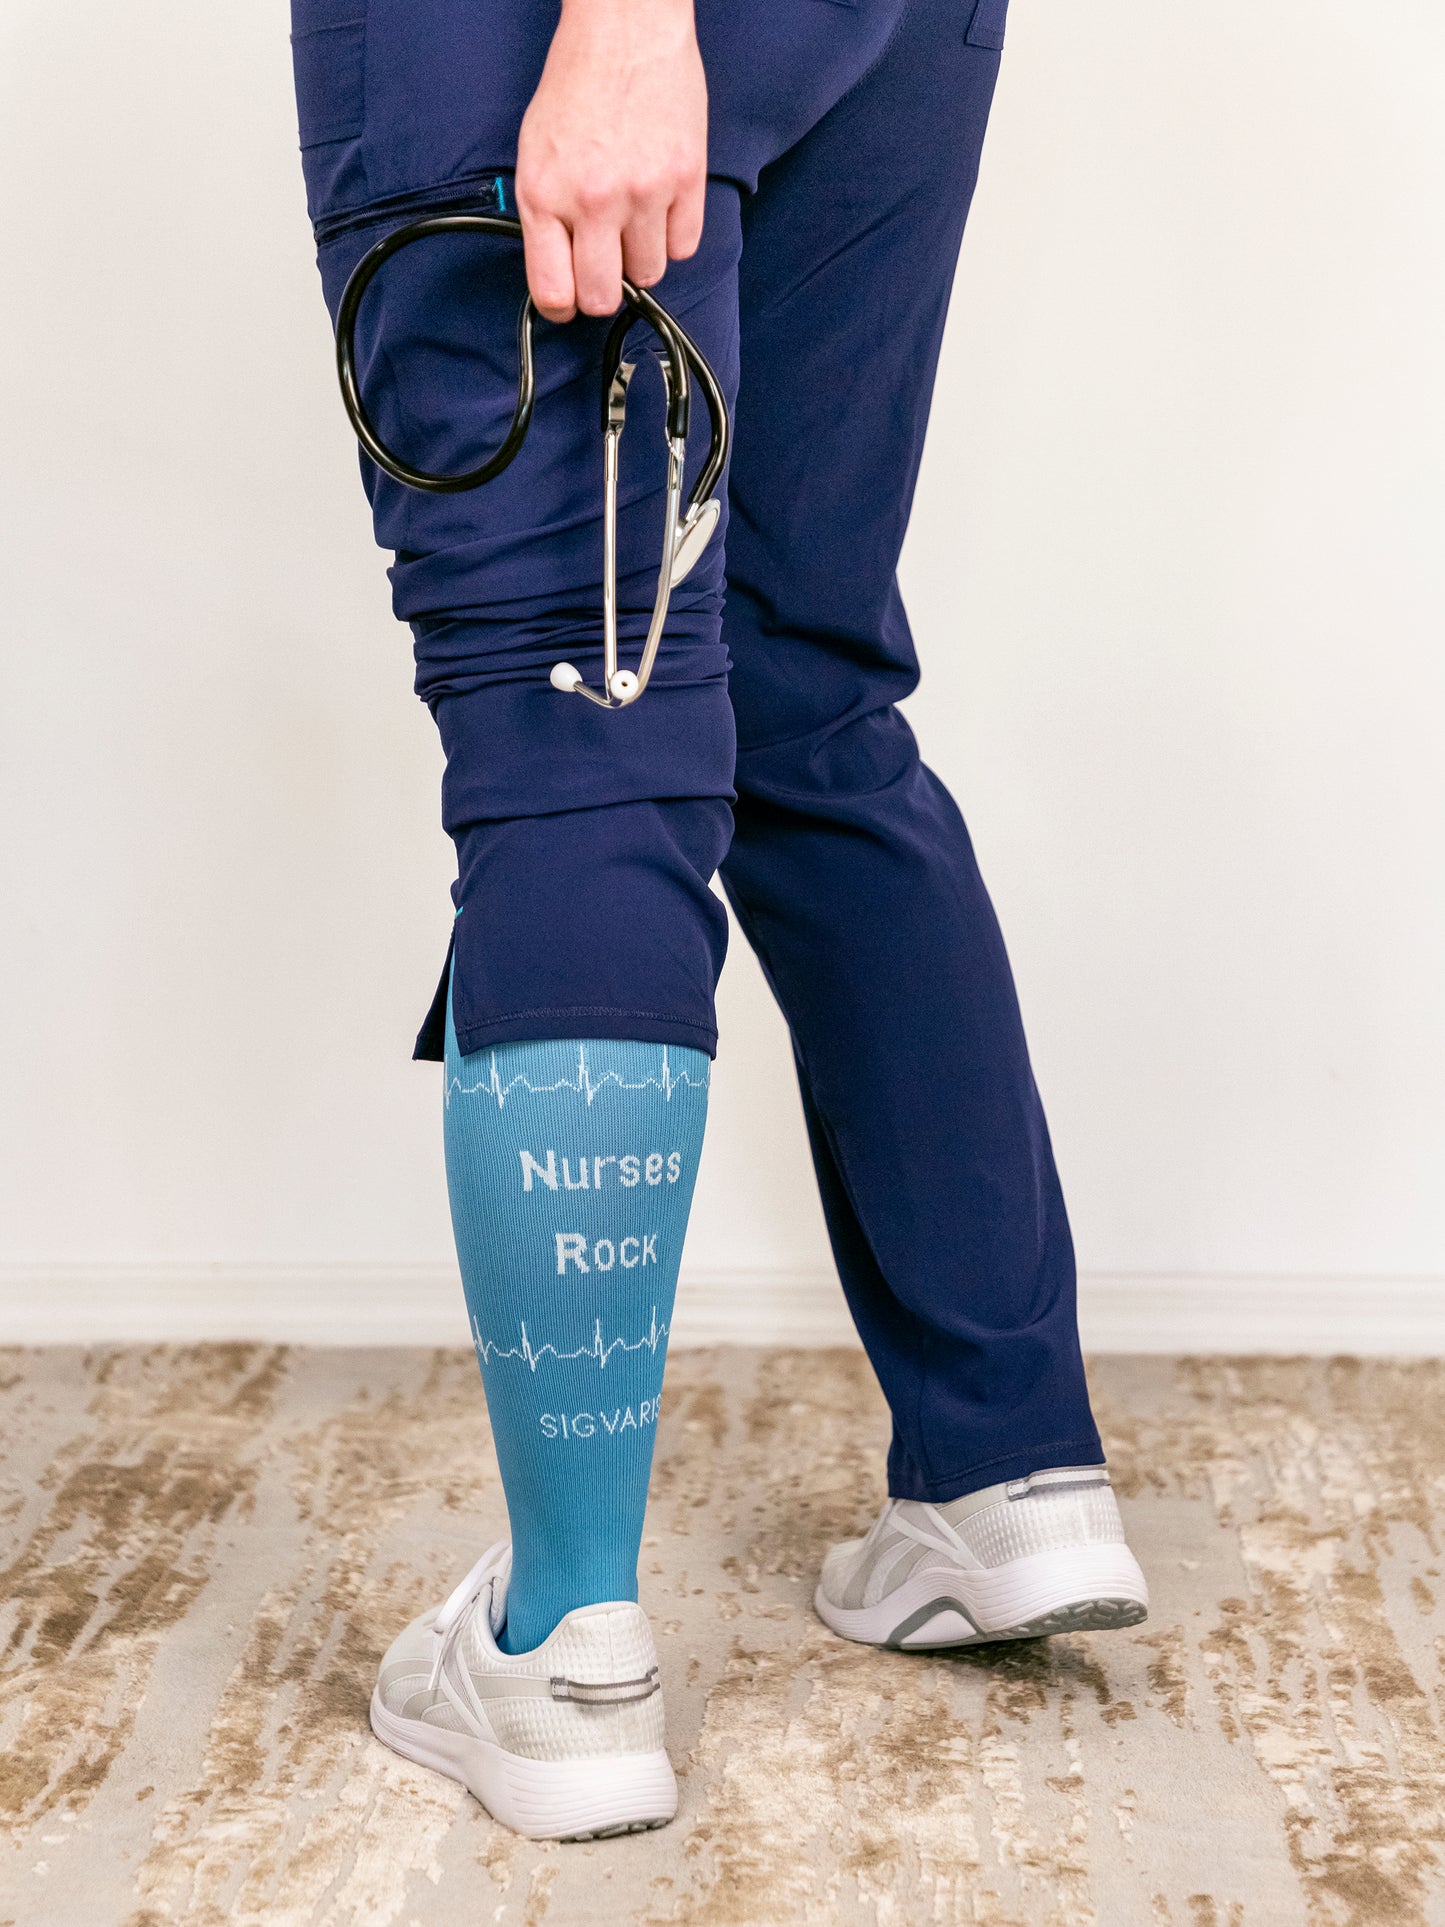 Nurse standing to show the back of Sigvaris Well-being Microfiber Shades compression socks in the color Nurse Blue